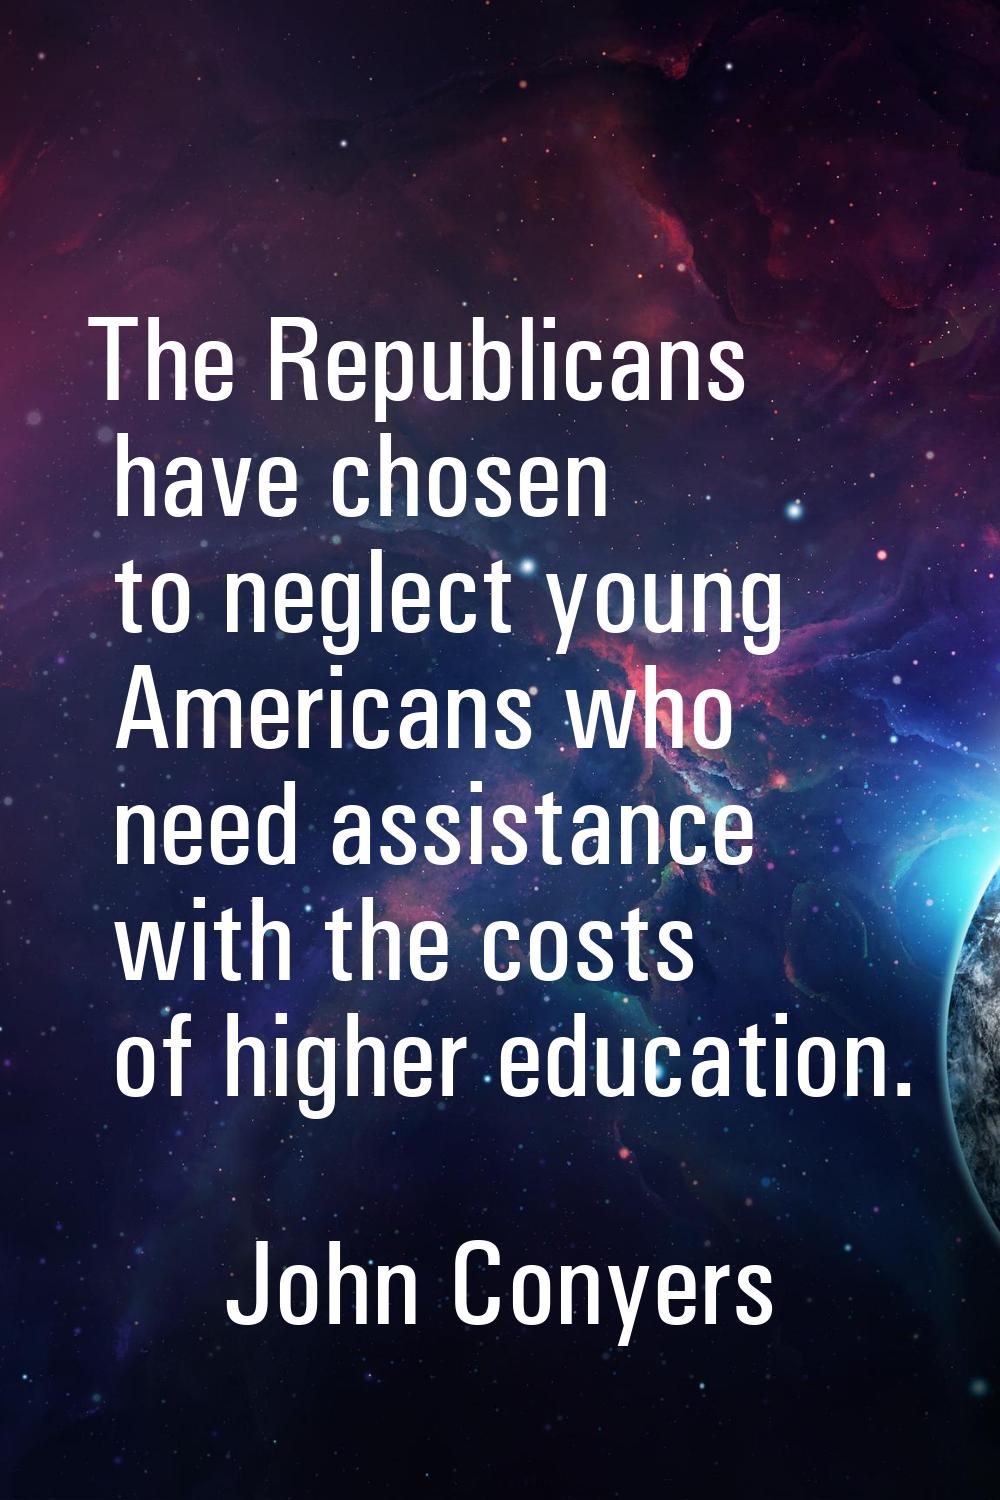 The Republicans have chosen to neglect young Americans who need assistance with the costs of higher